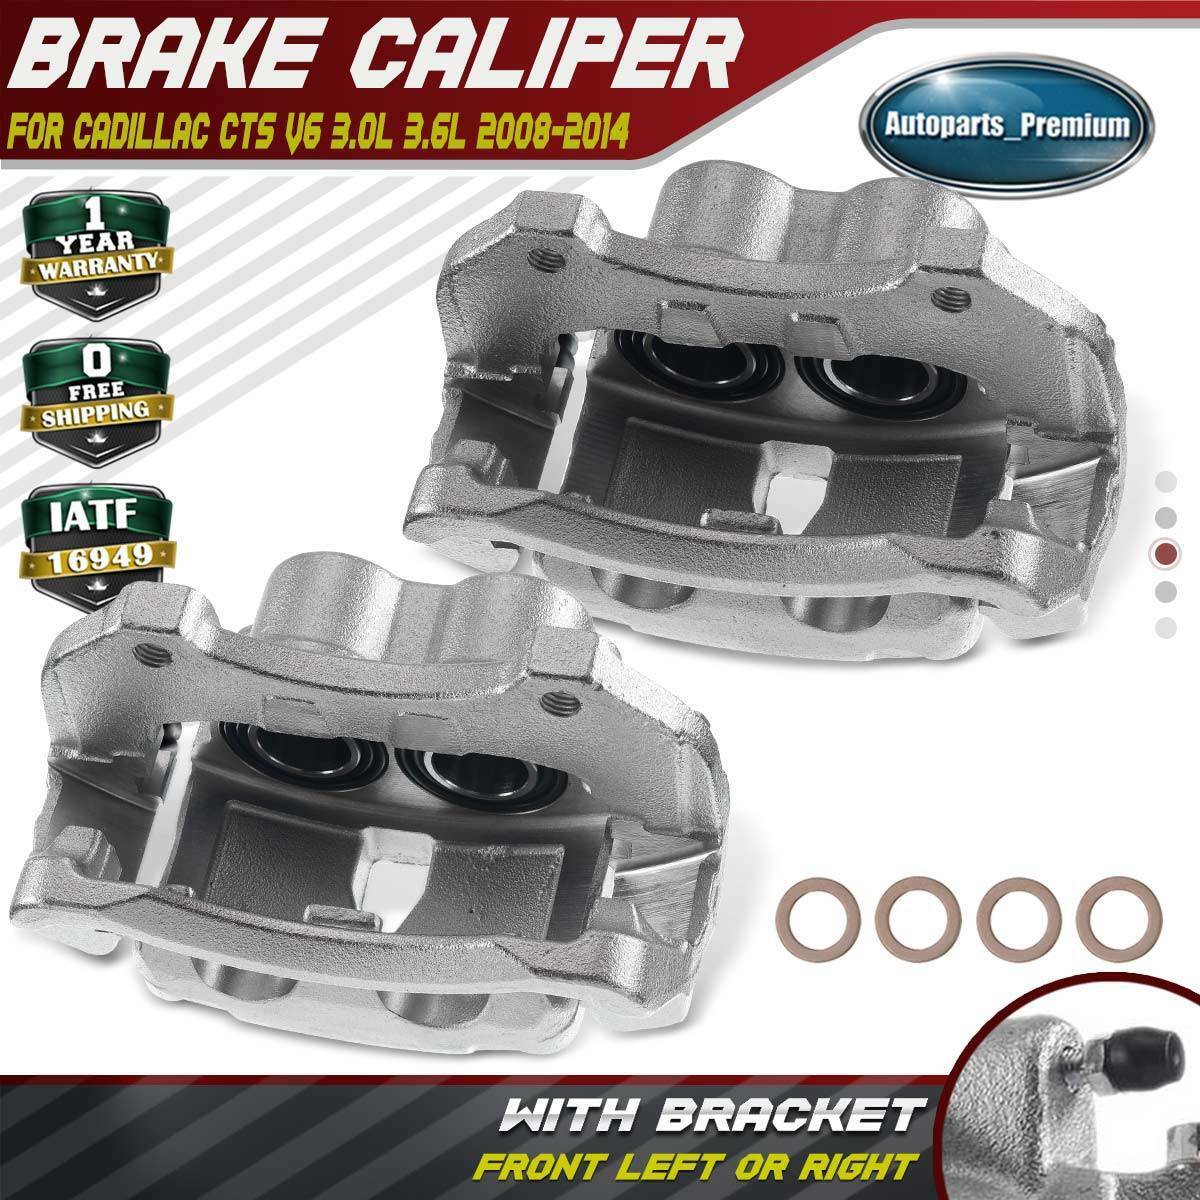 2x Brake Caliper w/ Bracket for Cadillac CTS 2008-2014 Front Driver & Passenger